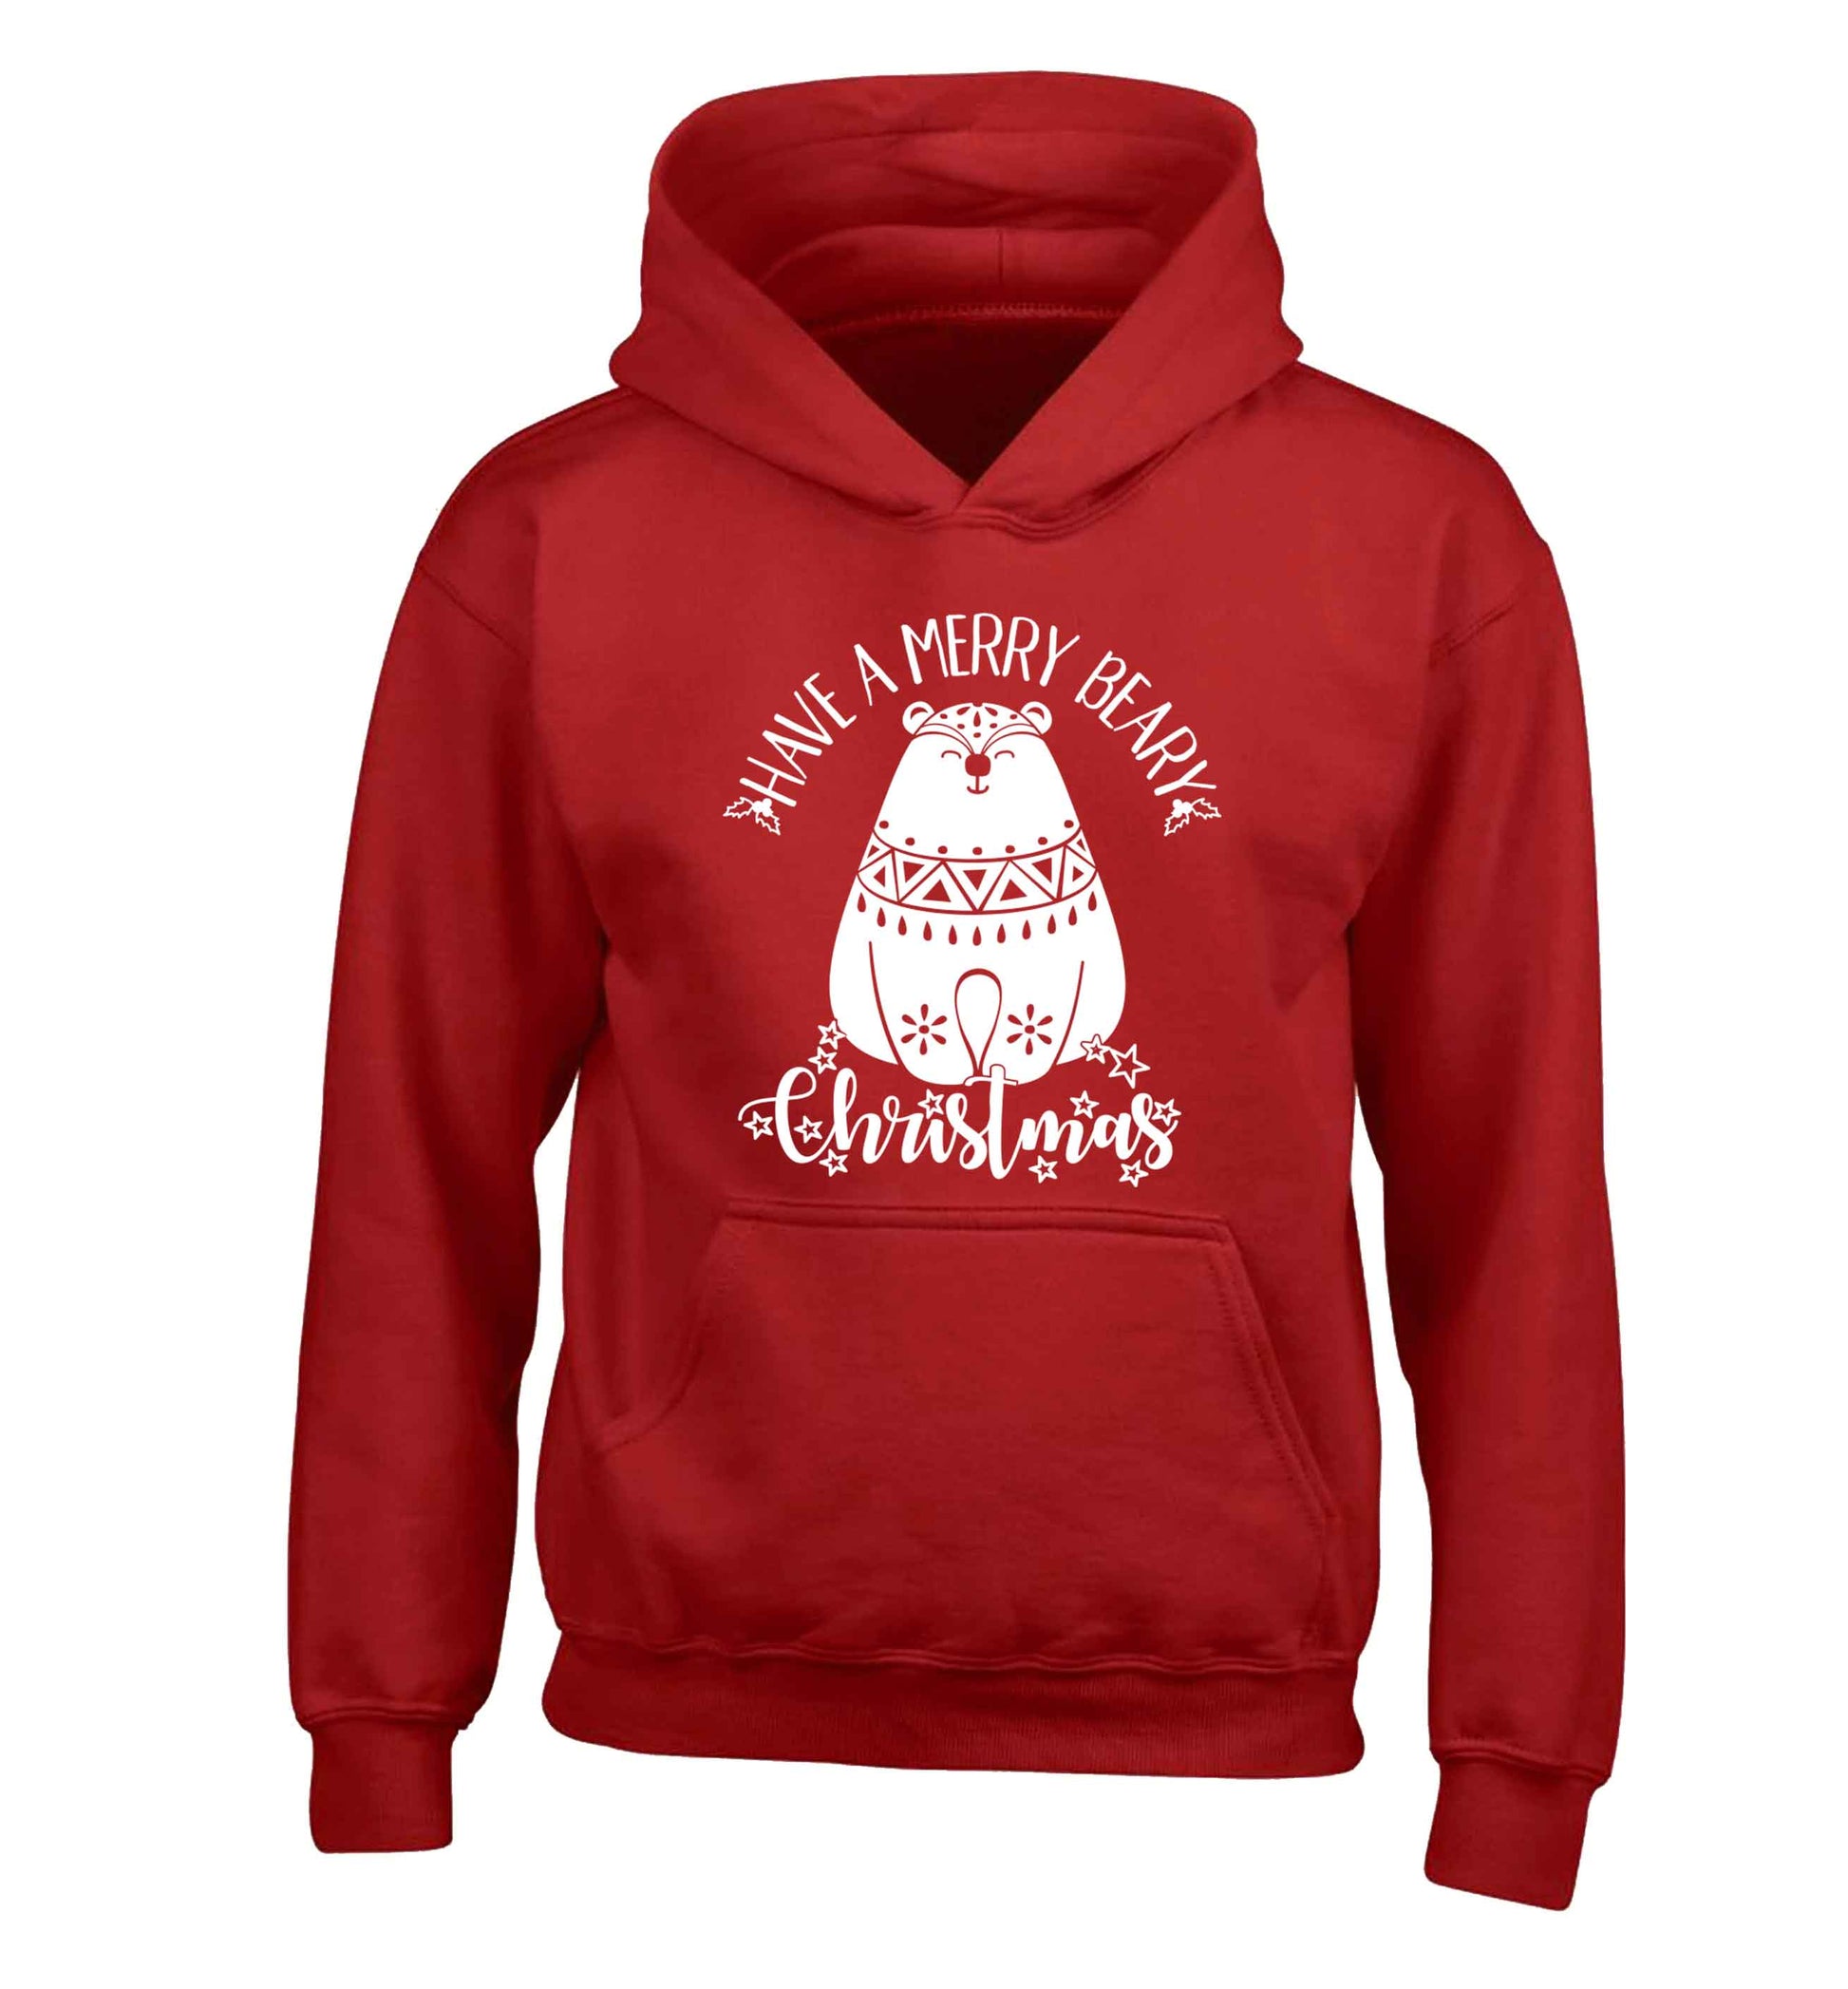 Have a merry beary Christmas children's red hoodie 12-13 Years